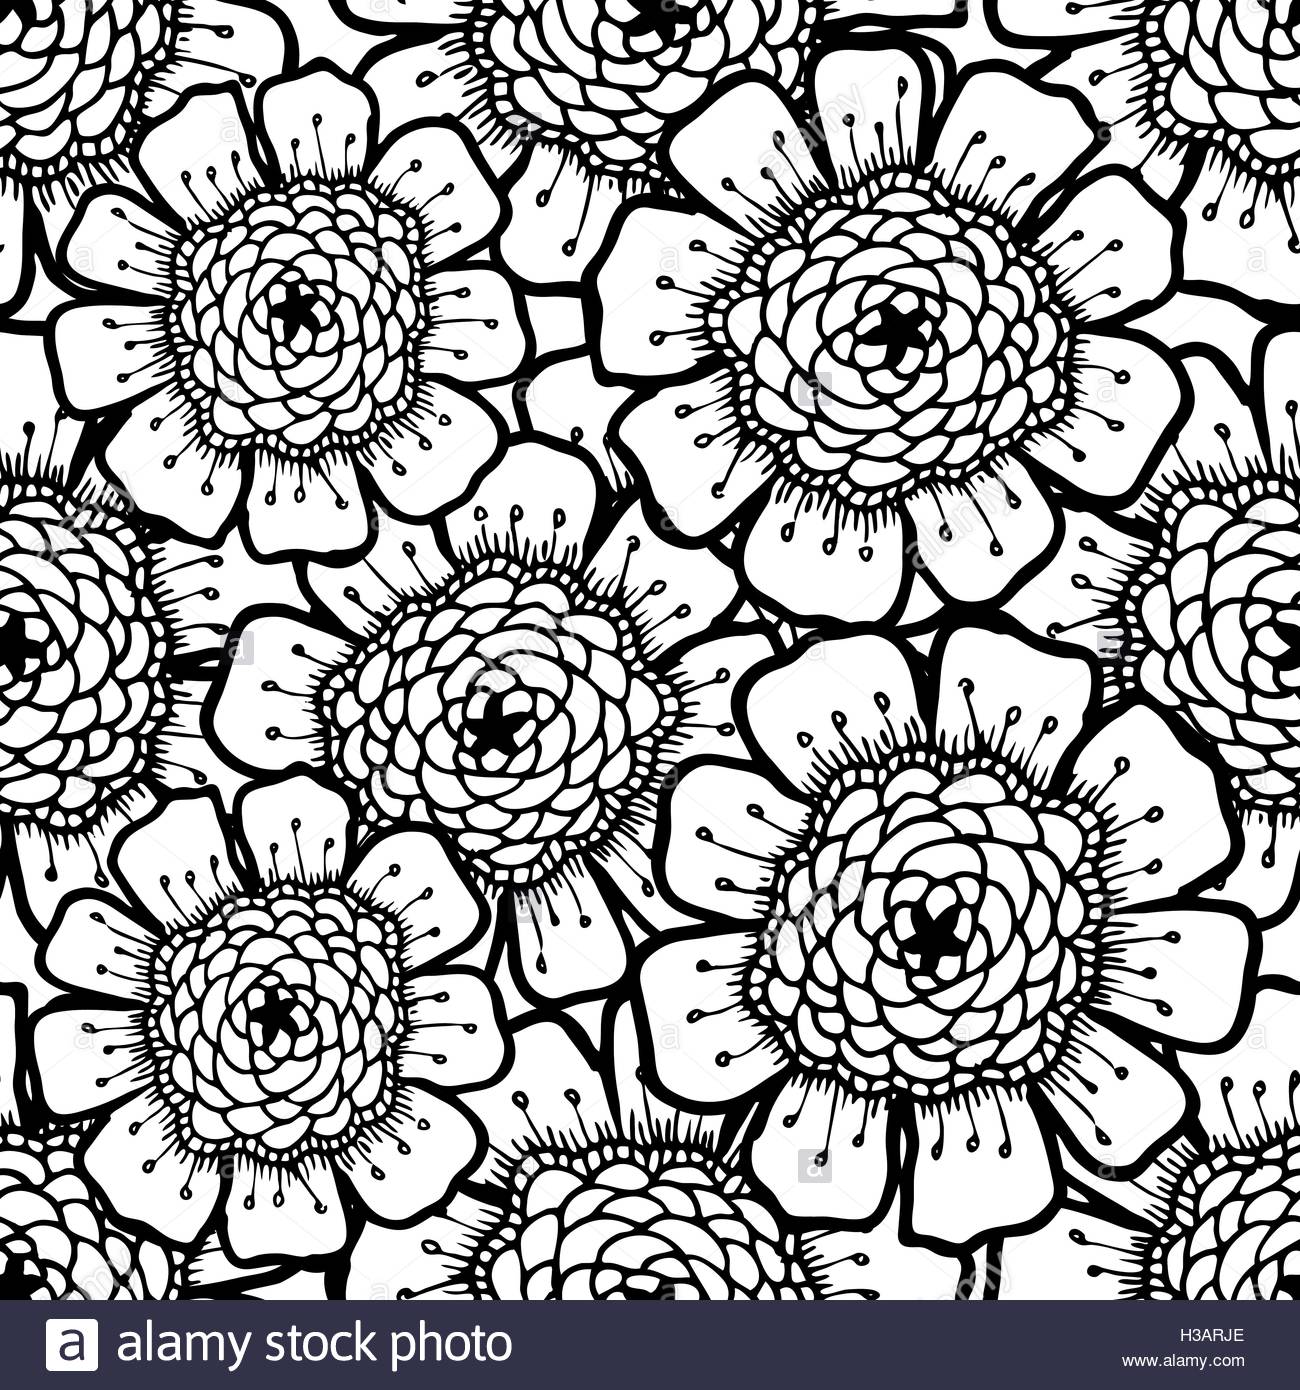 Ornate Floral Pattern With Flowers Doodle Sharpie Background